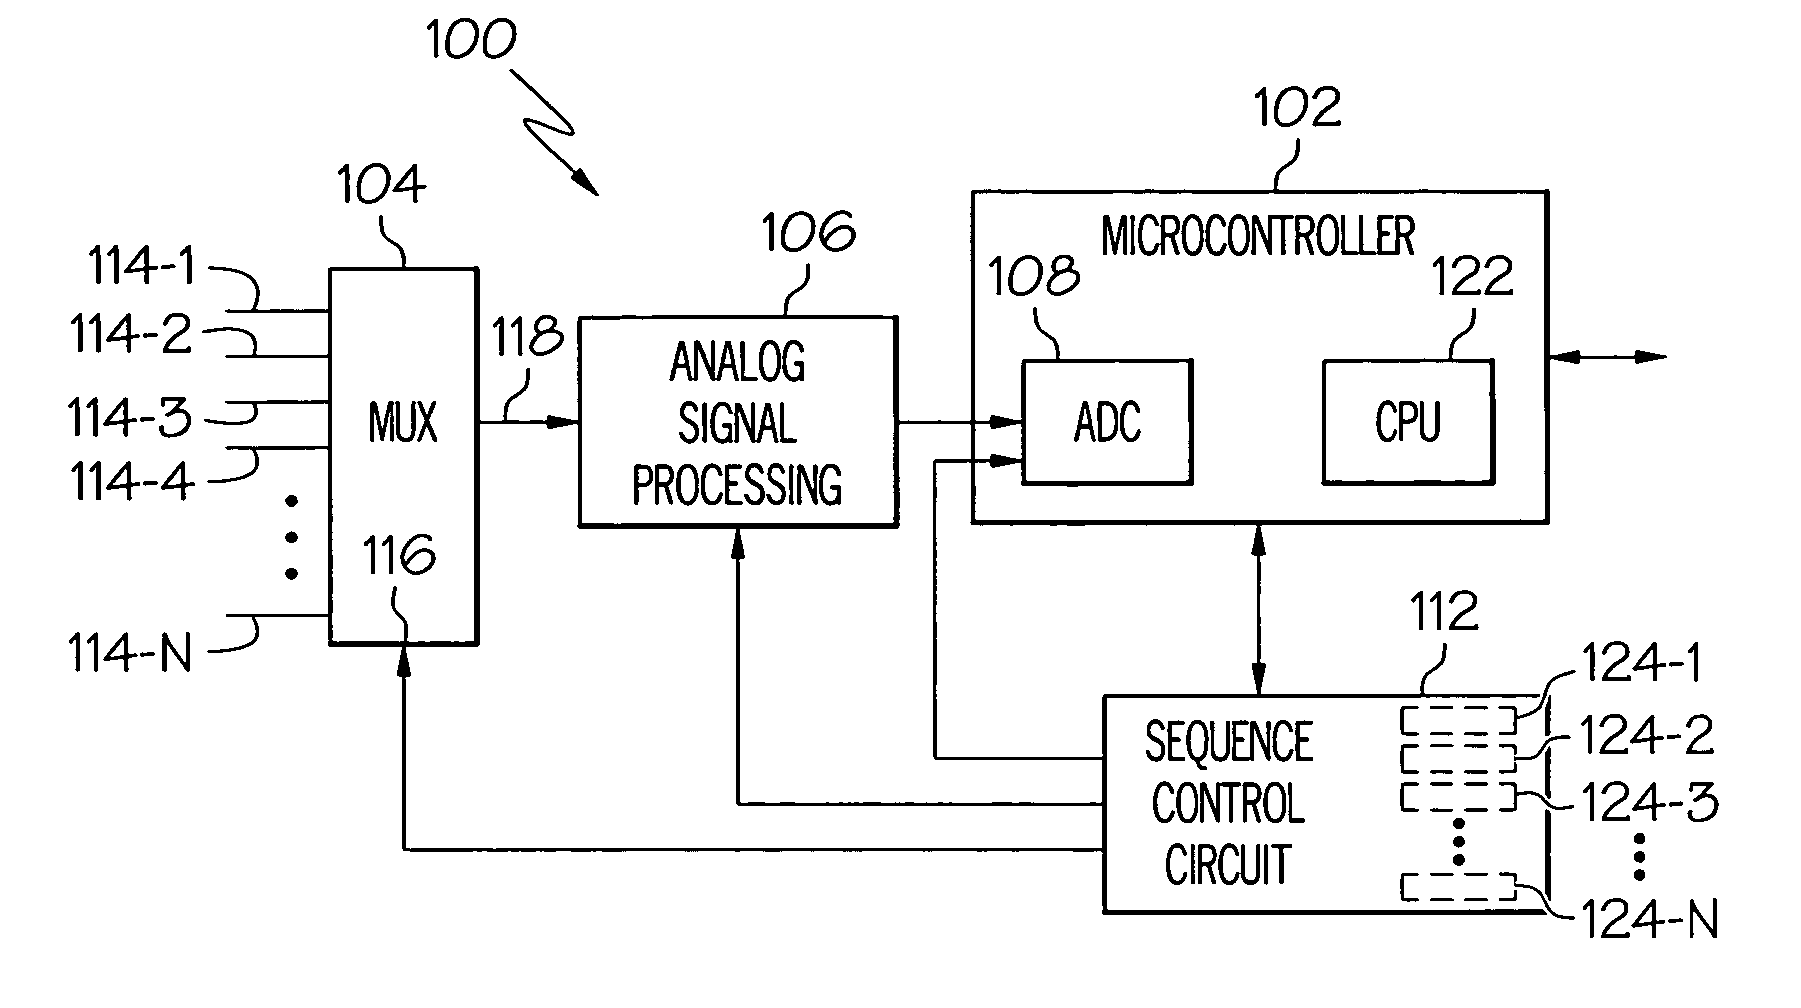 Circuit and method for extending microcontroller analog input capability